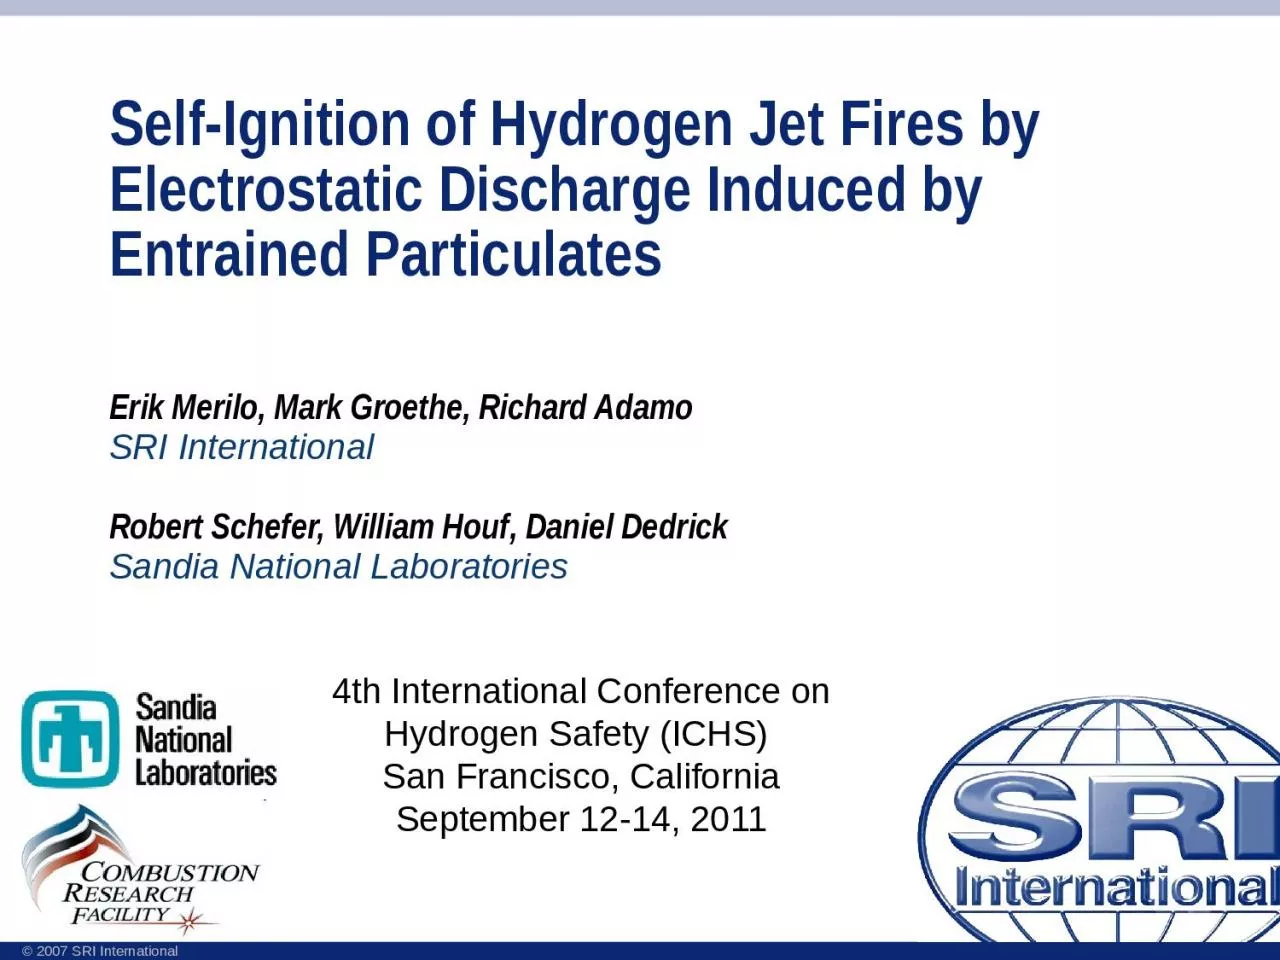 Self-Ignition of Hydrogen Jet Fires by Electrostatic Discharge Induced by Entrained Particulates